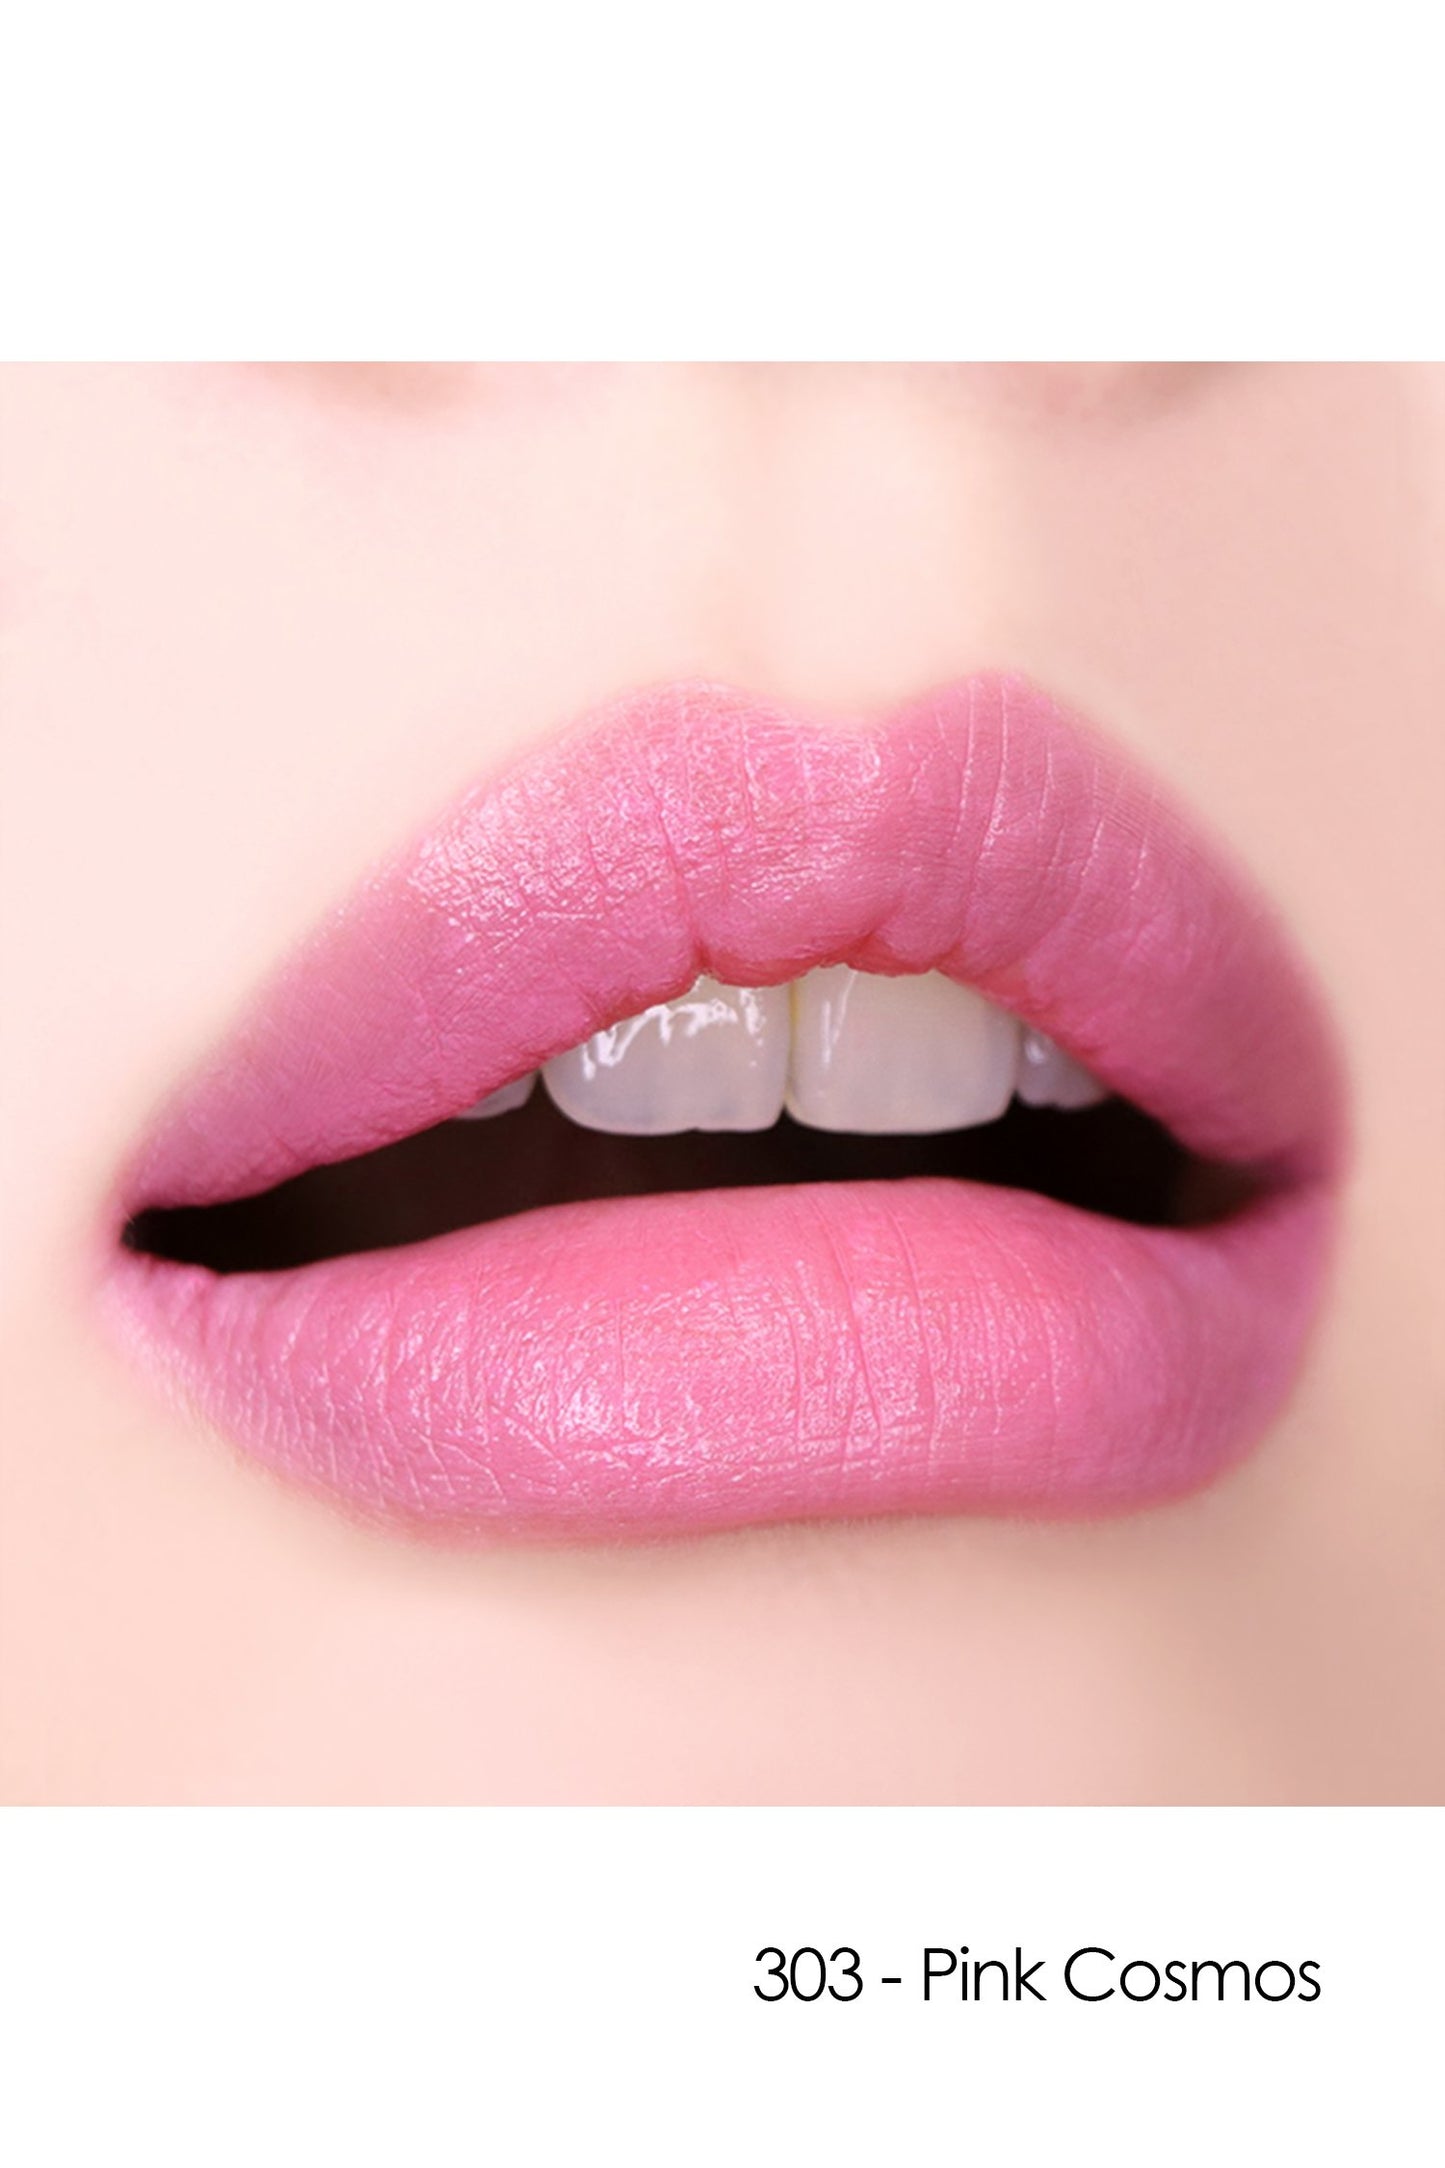 Lips with Lipstick F: Fairy Flower 303 - Pink Cosmos